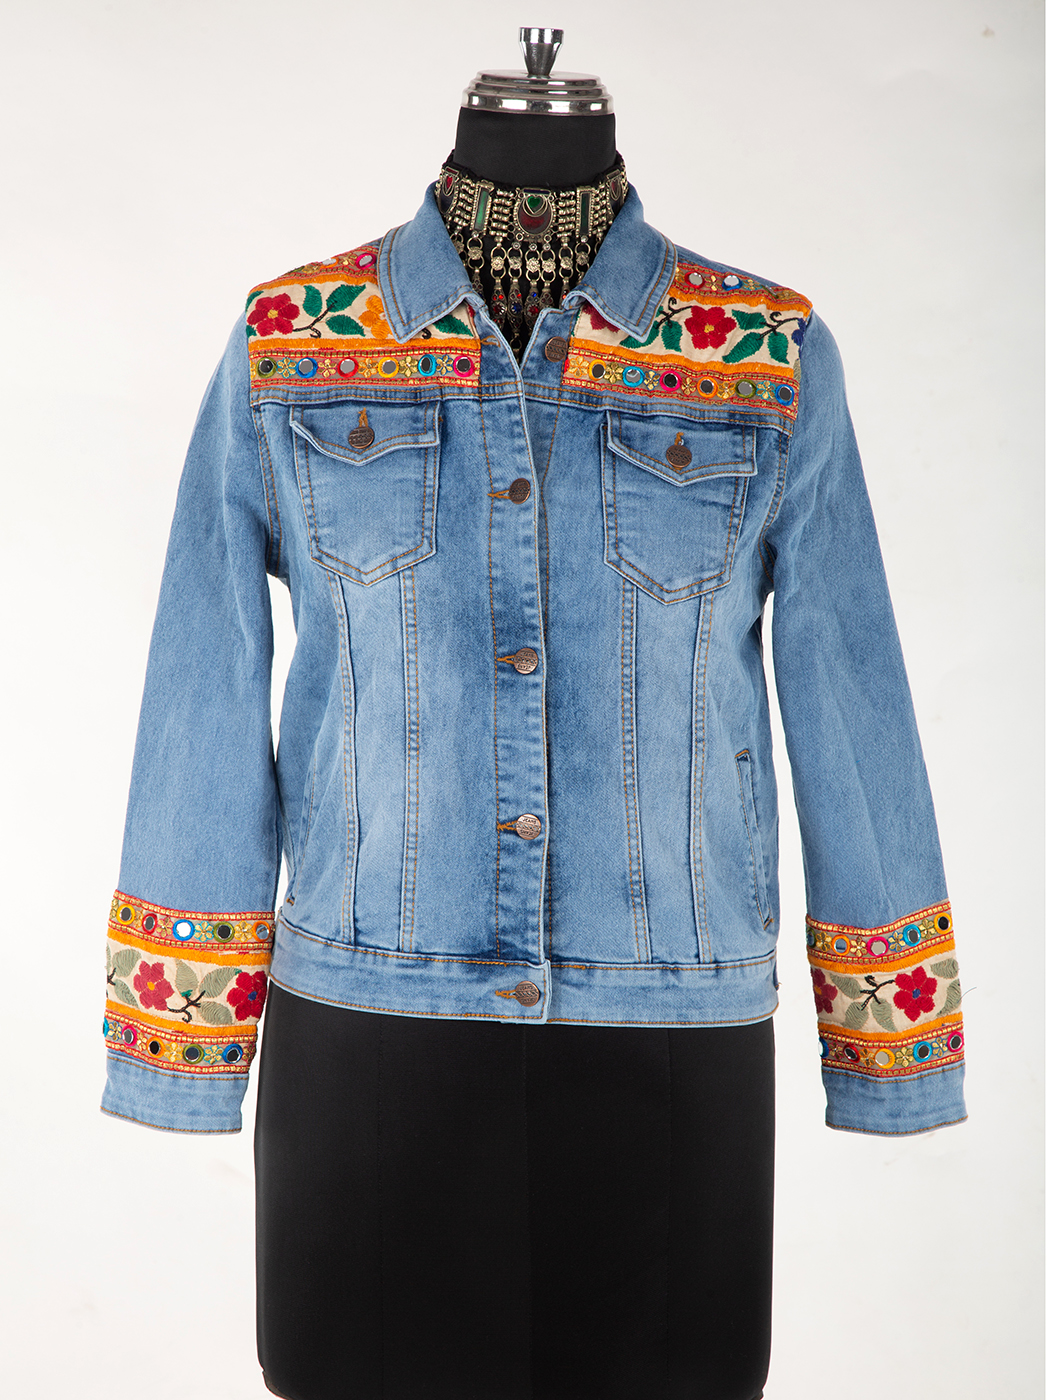 jeans jacket with african print & burlap patches